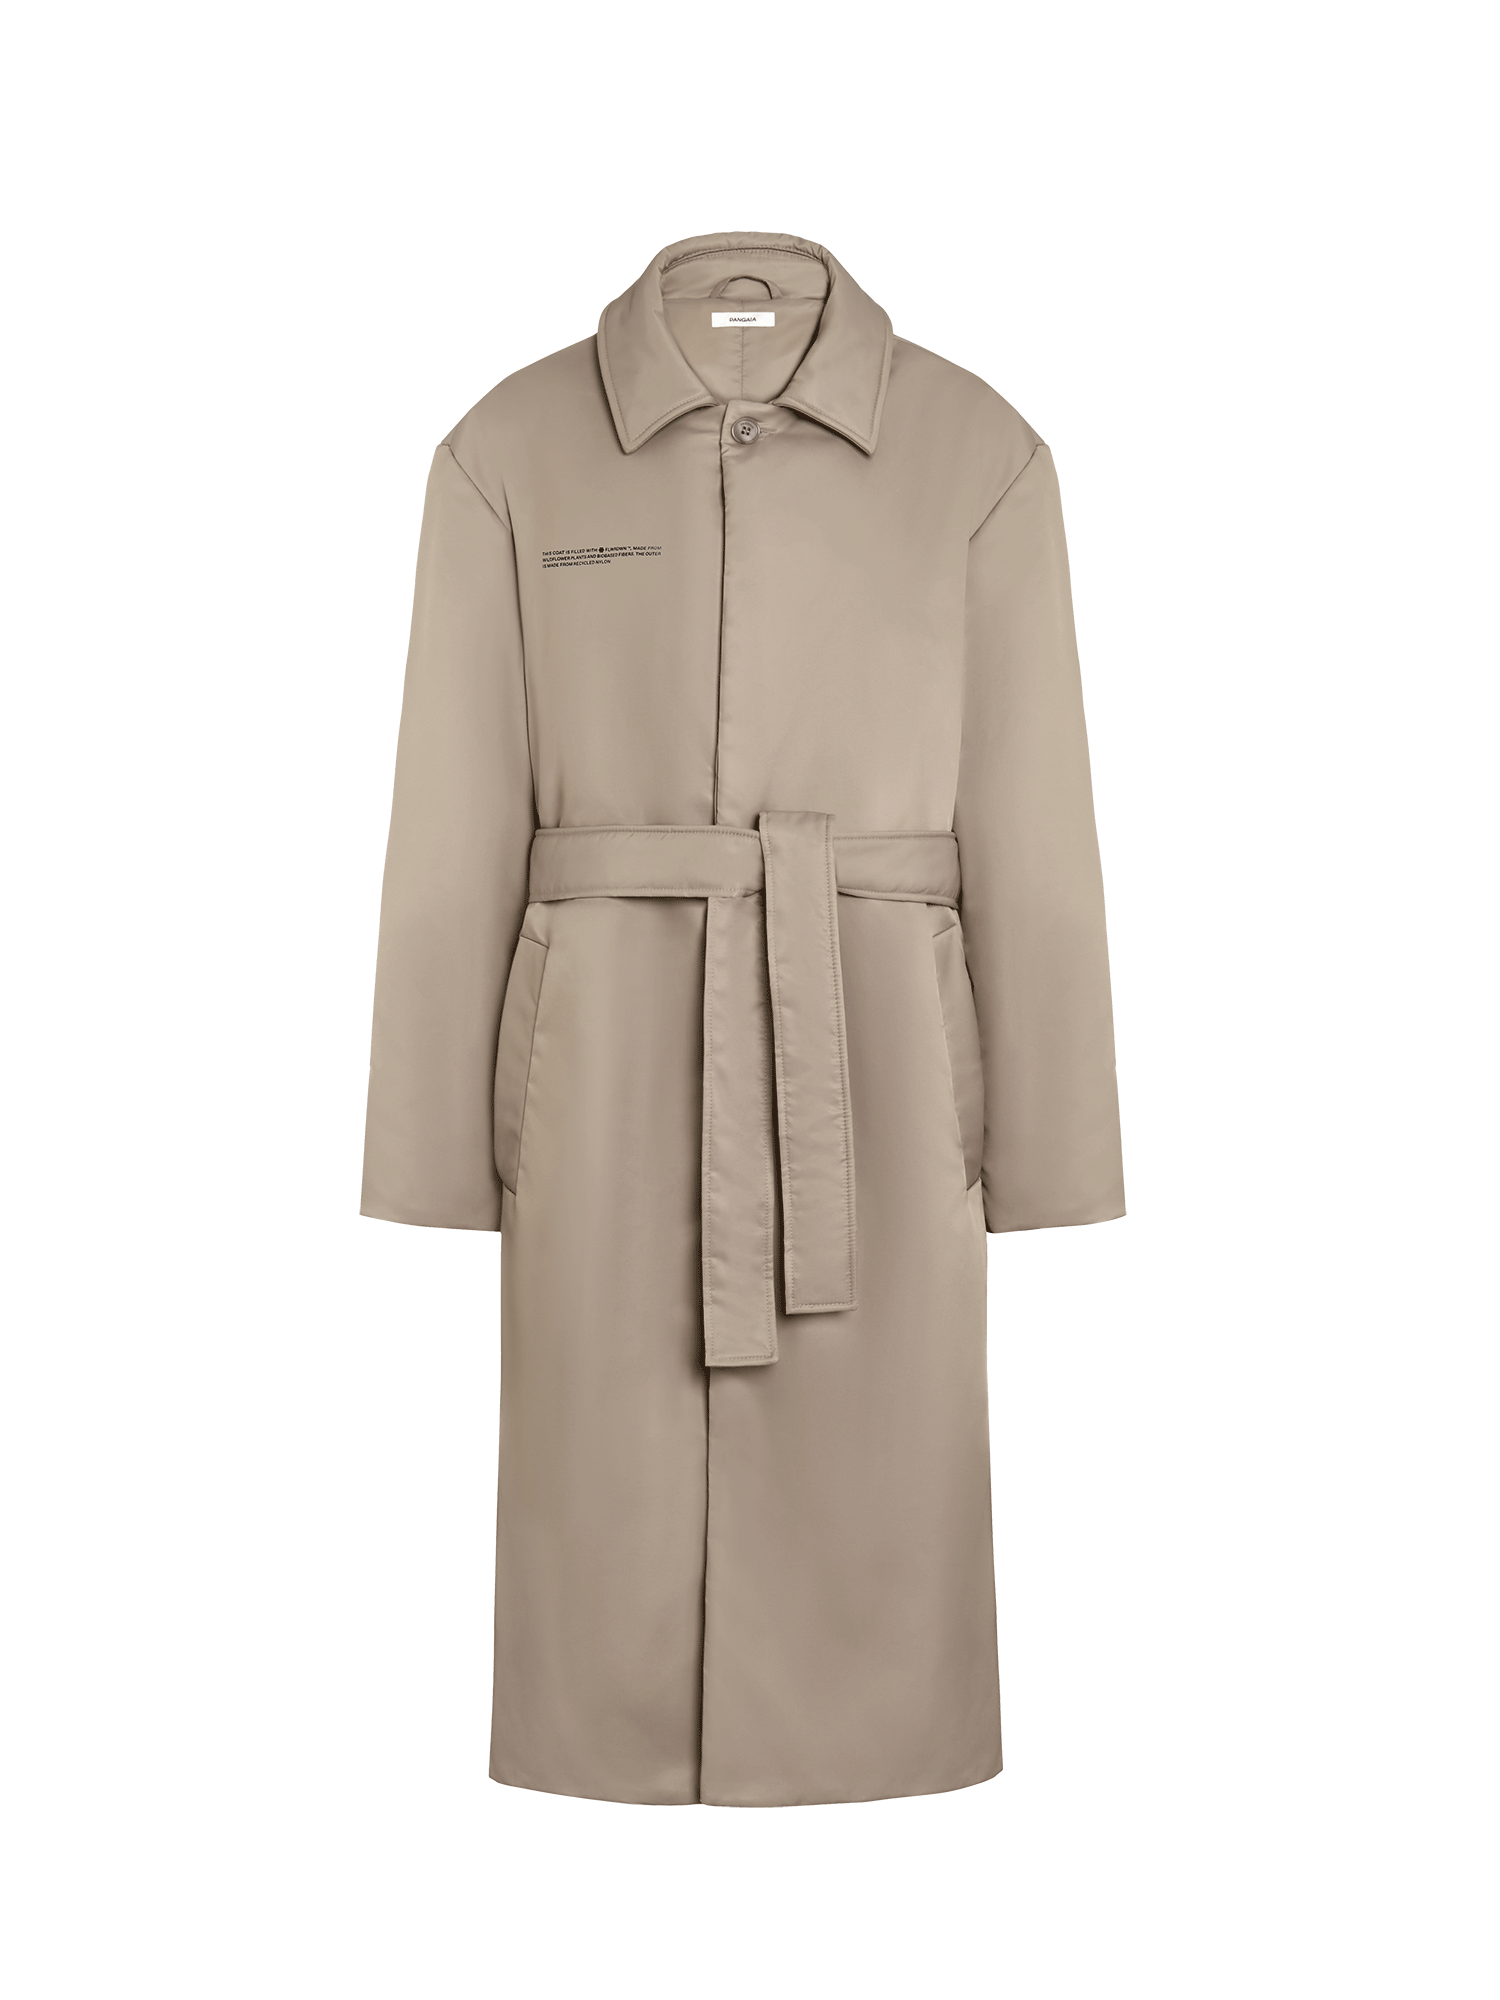 Recycled-Nylon-NW-FLWRDWN-Trench-Coat-Taupe-tall-packshot-3